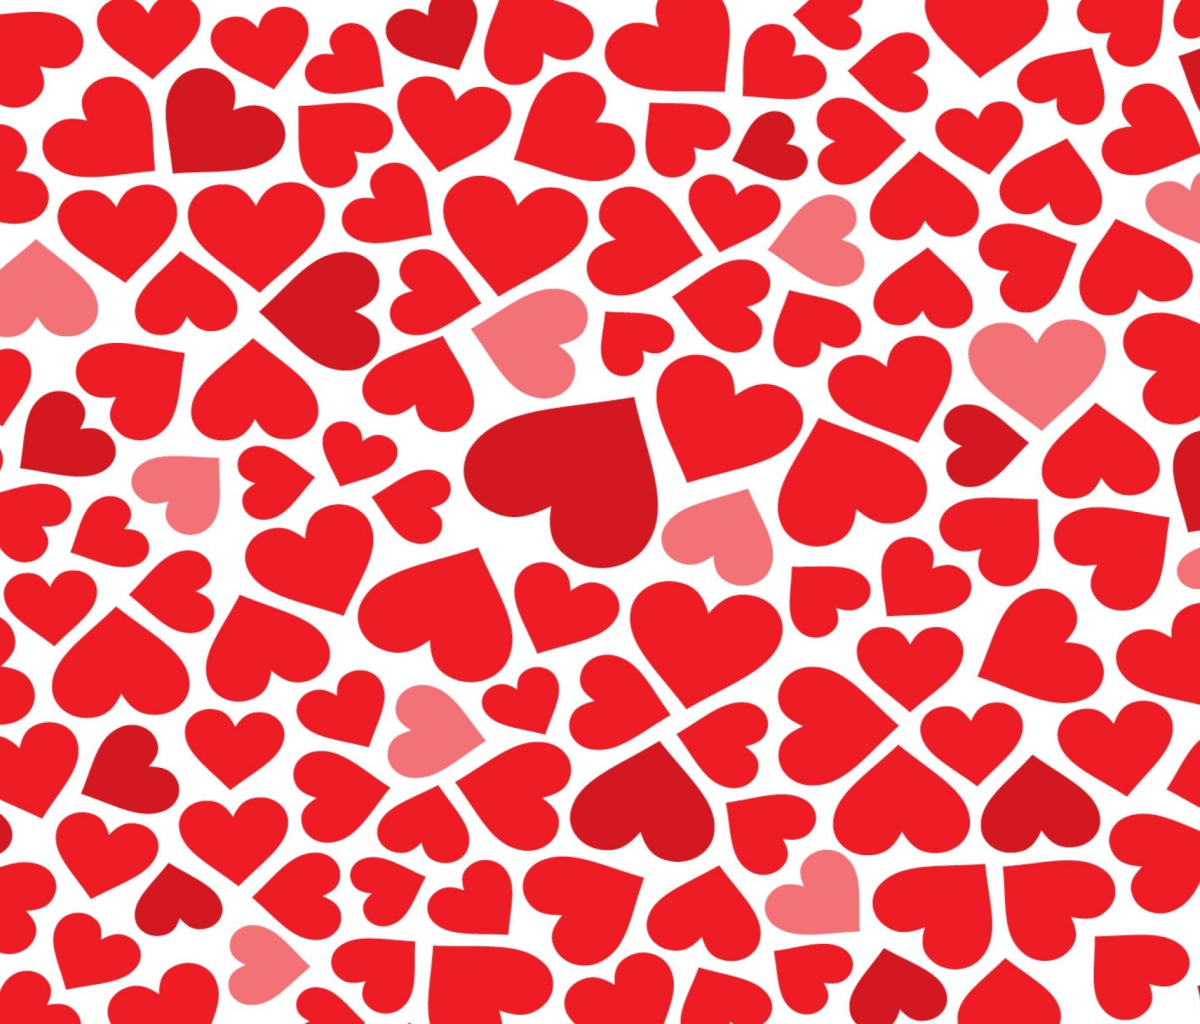 Red Hearts wallpaper 1200x1024